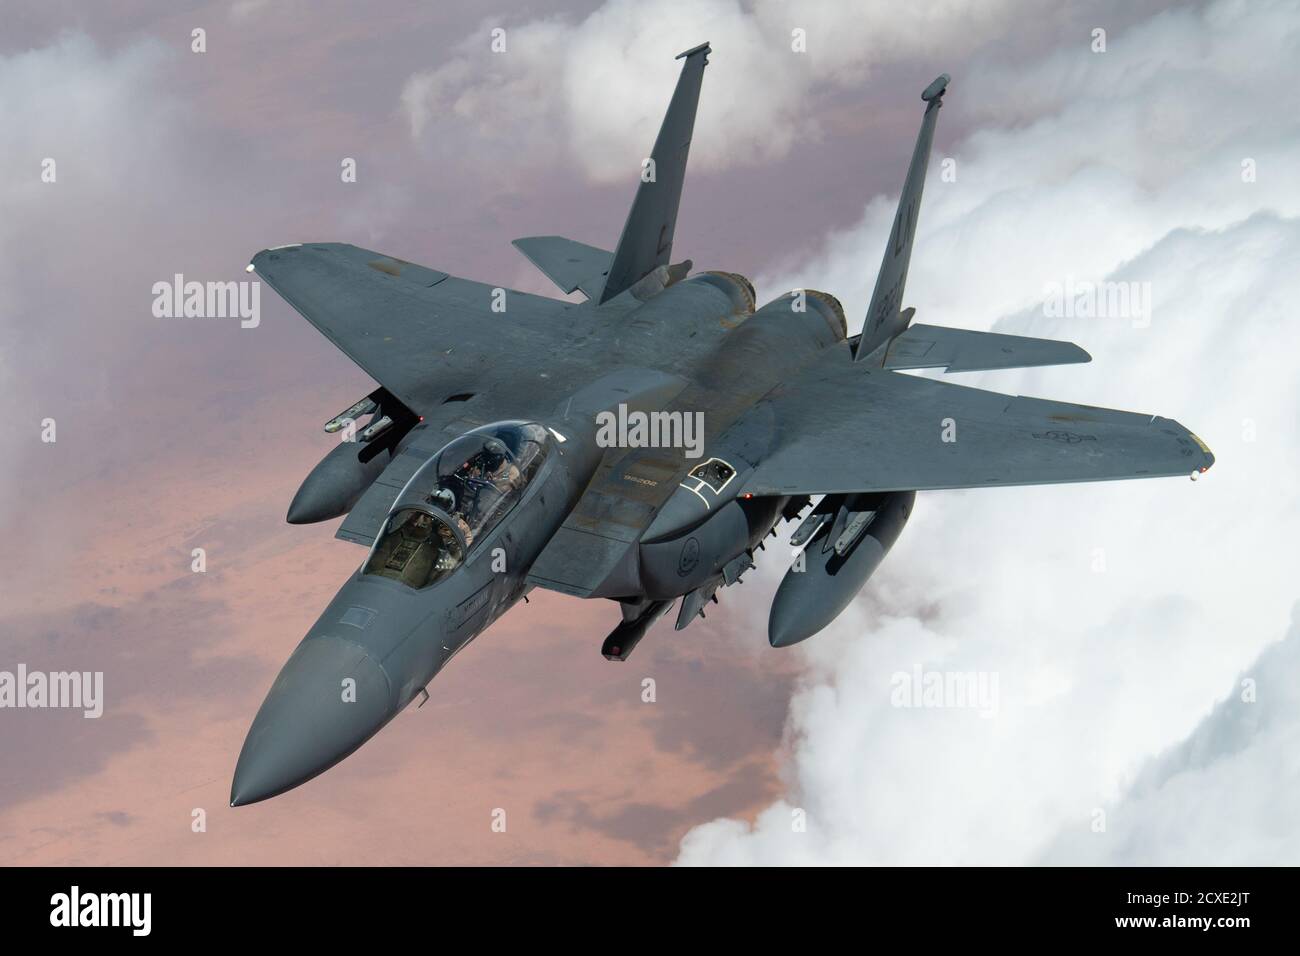 A U.S. Air Force F-15E Strike Eagle flies over the U.S. Central Command area of responsibility, Sept 10, 2020. The F-15E Strike Eagle is a dual-role fighter designed to perform air-to-air and air-to-ground missions, demonstrating U.S. Air Force Central Commands' posture to compete, deter, and win against state and non-state actors. (U.S. Air Force photo by Staff Sgt. Justin Parsons) Stock Photo